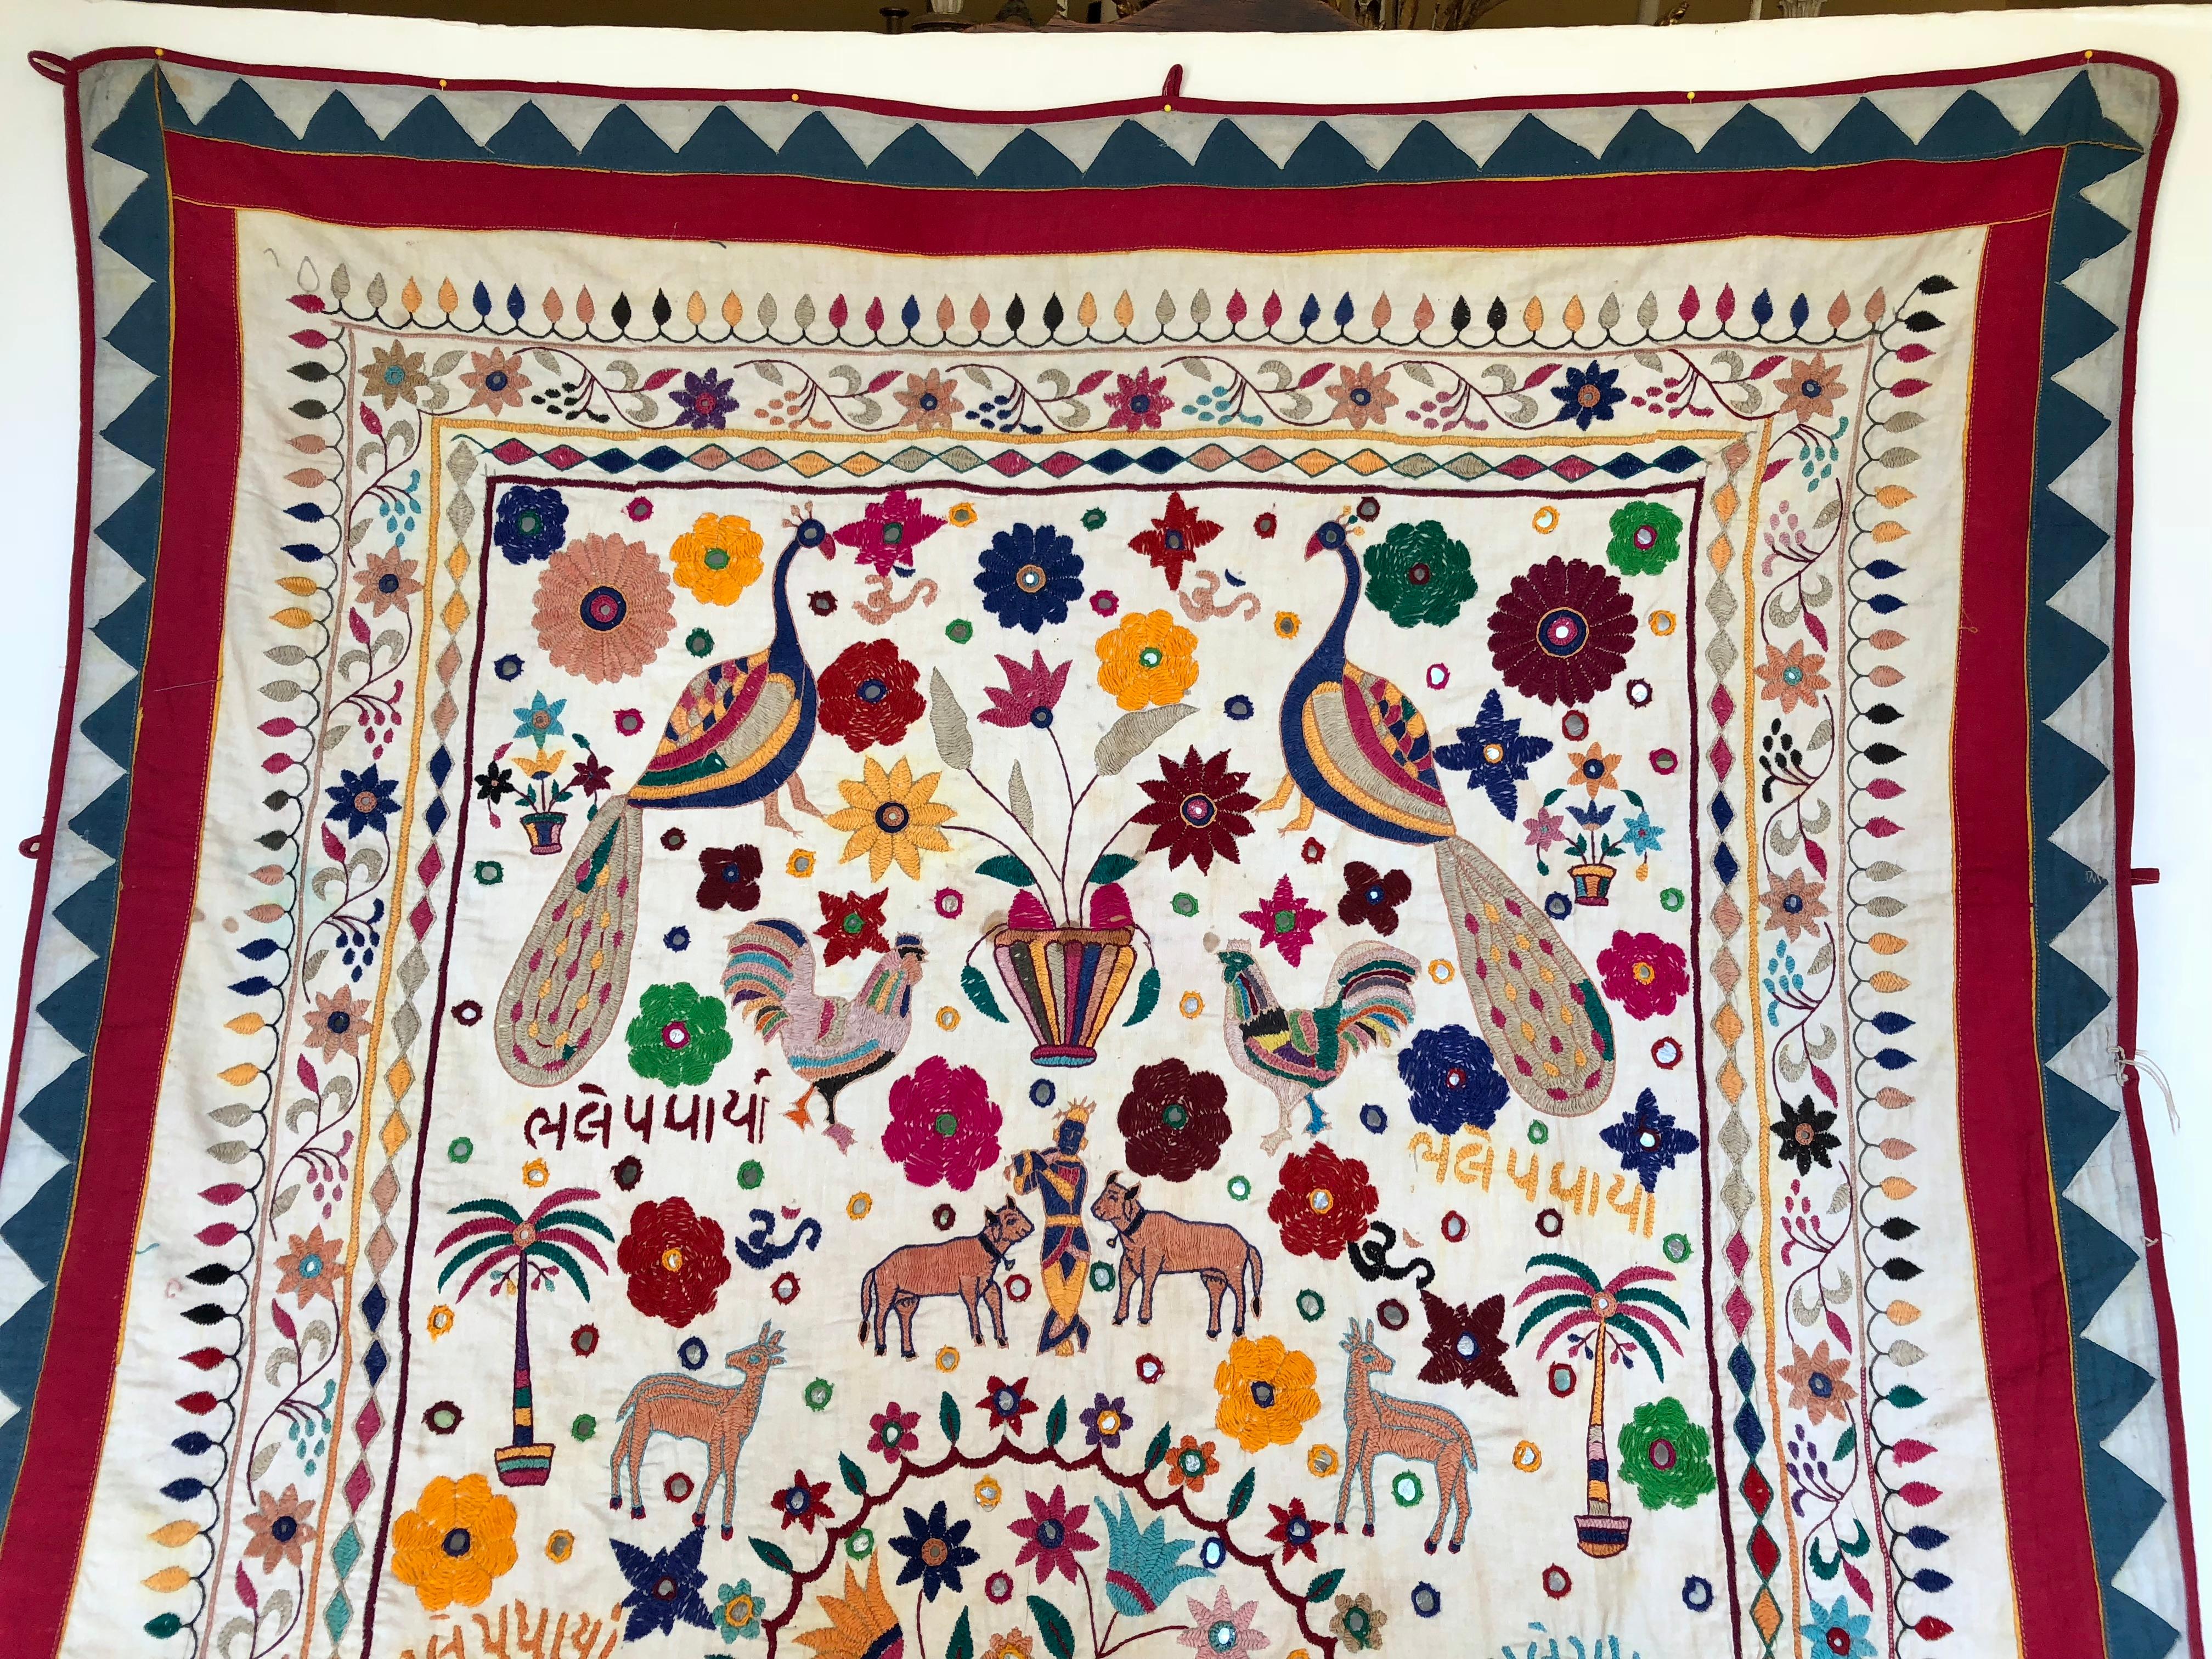 Vintage wedding canopy from India. The cotton base is hand embroidered with vibrant colored tribal designs and mirrors.
This piece was made for personal use, not the tourist trade, so it shows some wear but is still an outstanding example of Folk